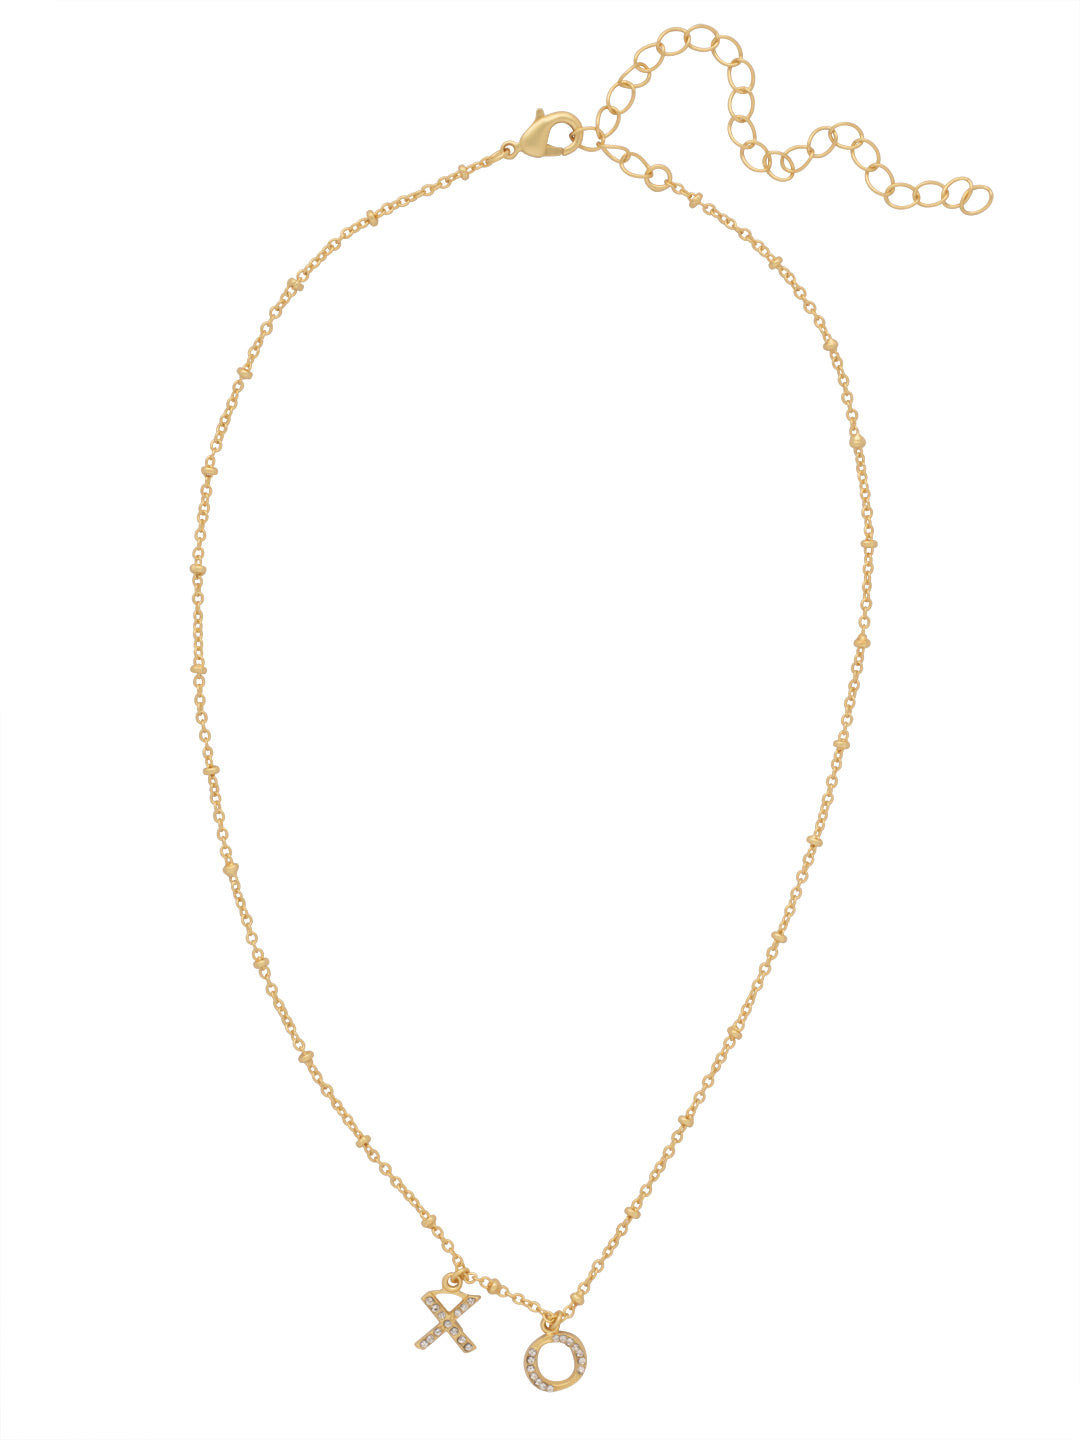 XO Pendant Necklace - NFK5MGCRY - <p>The XO Pendant Necklace features a crystal embellished letter X and O on a thin adjustable chain, secured with a lobster claw clasp. From Sorrelli's Crystal collection in our Matte Gold-tone finish.</p>